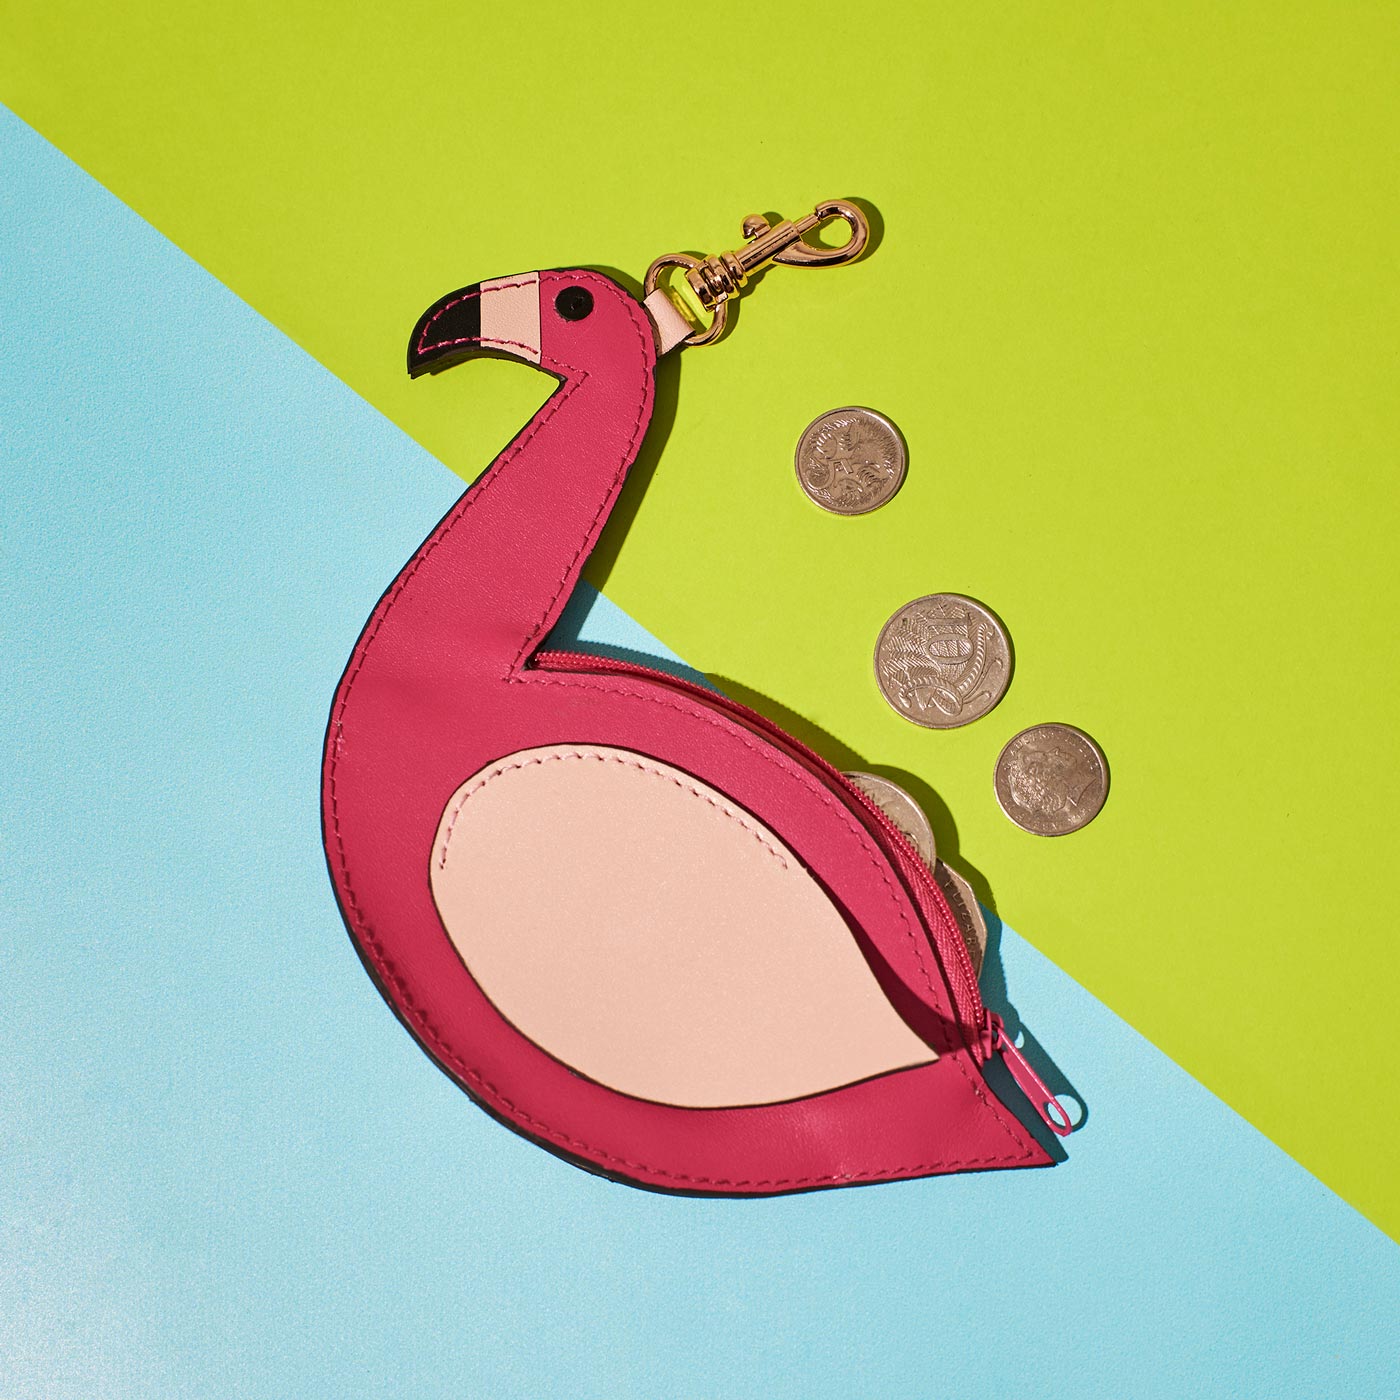 Wicker Darling's flamingo coin purse on a colourful background